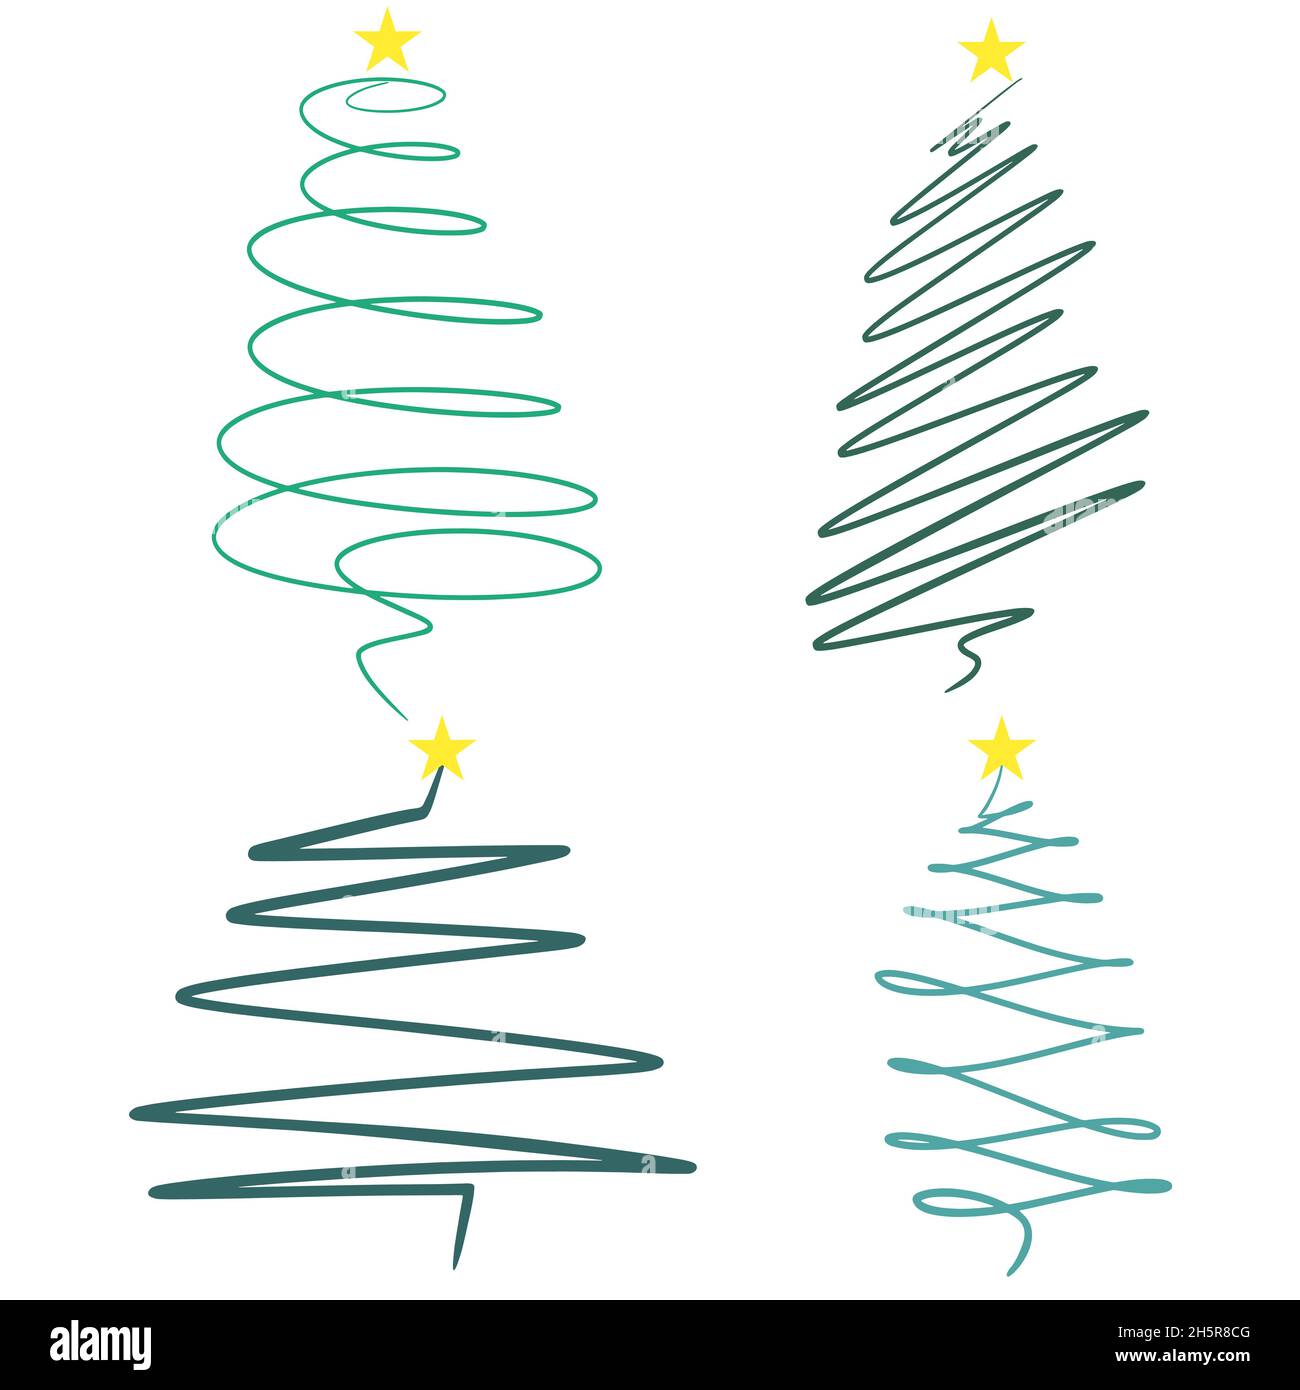 Set of concise Christmas spruces, vector illustration. Collection of Christmas trees with stars line art. Minimalistic decorations for New Year's card Stock Vector